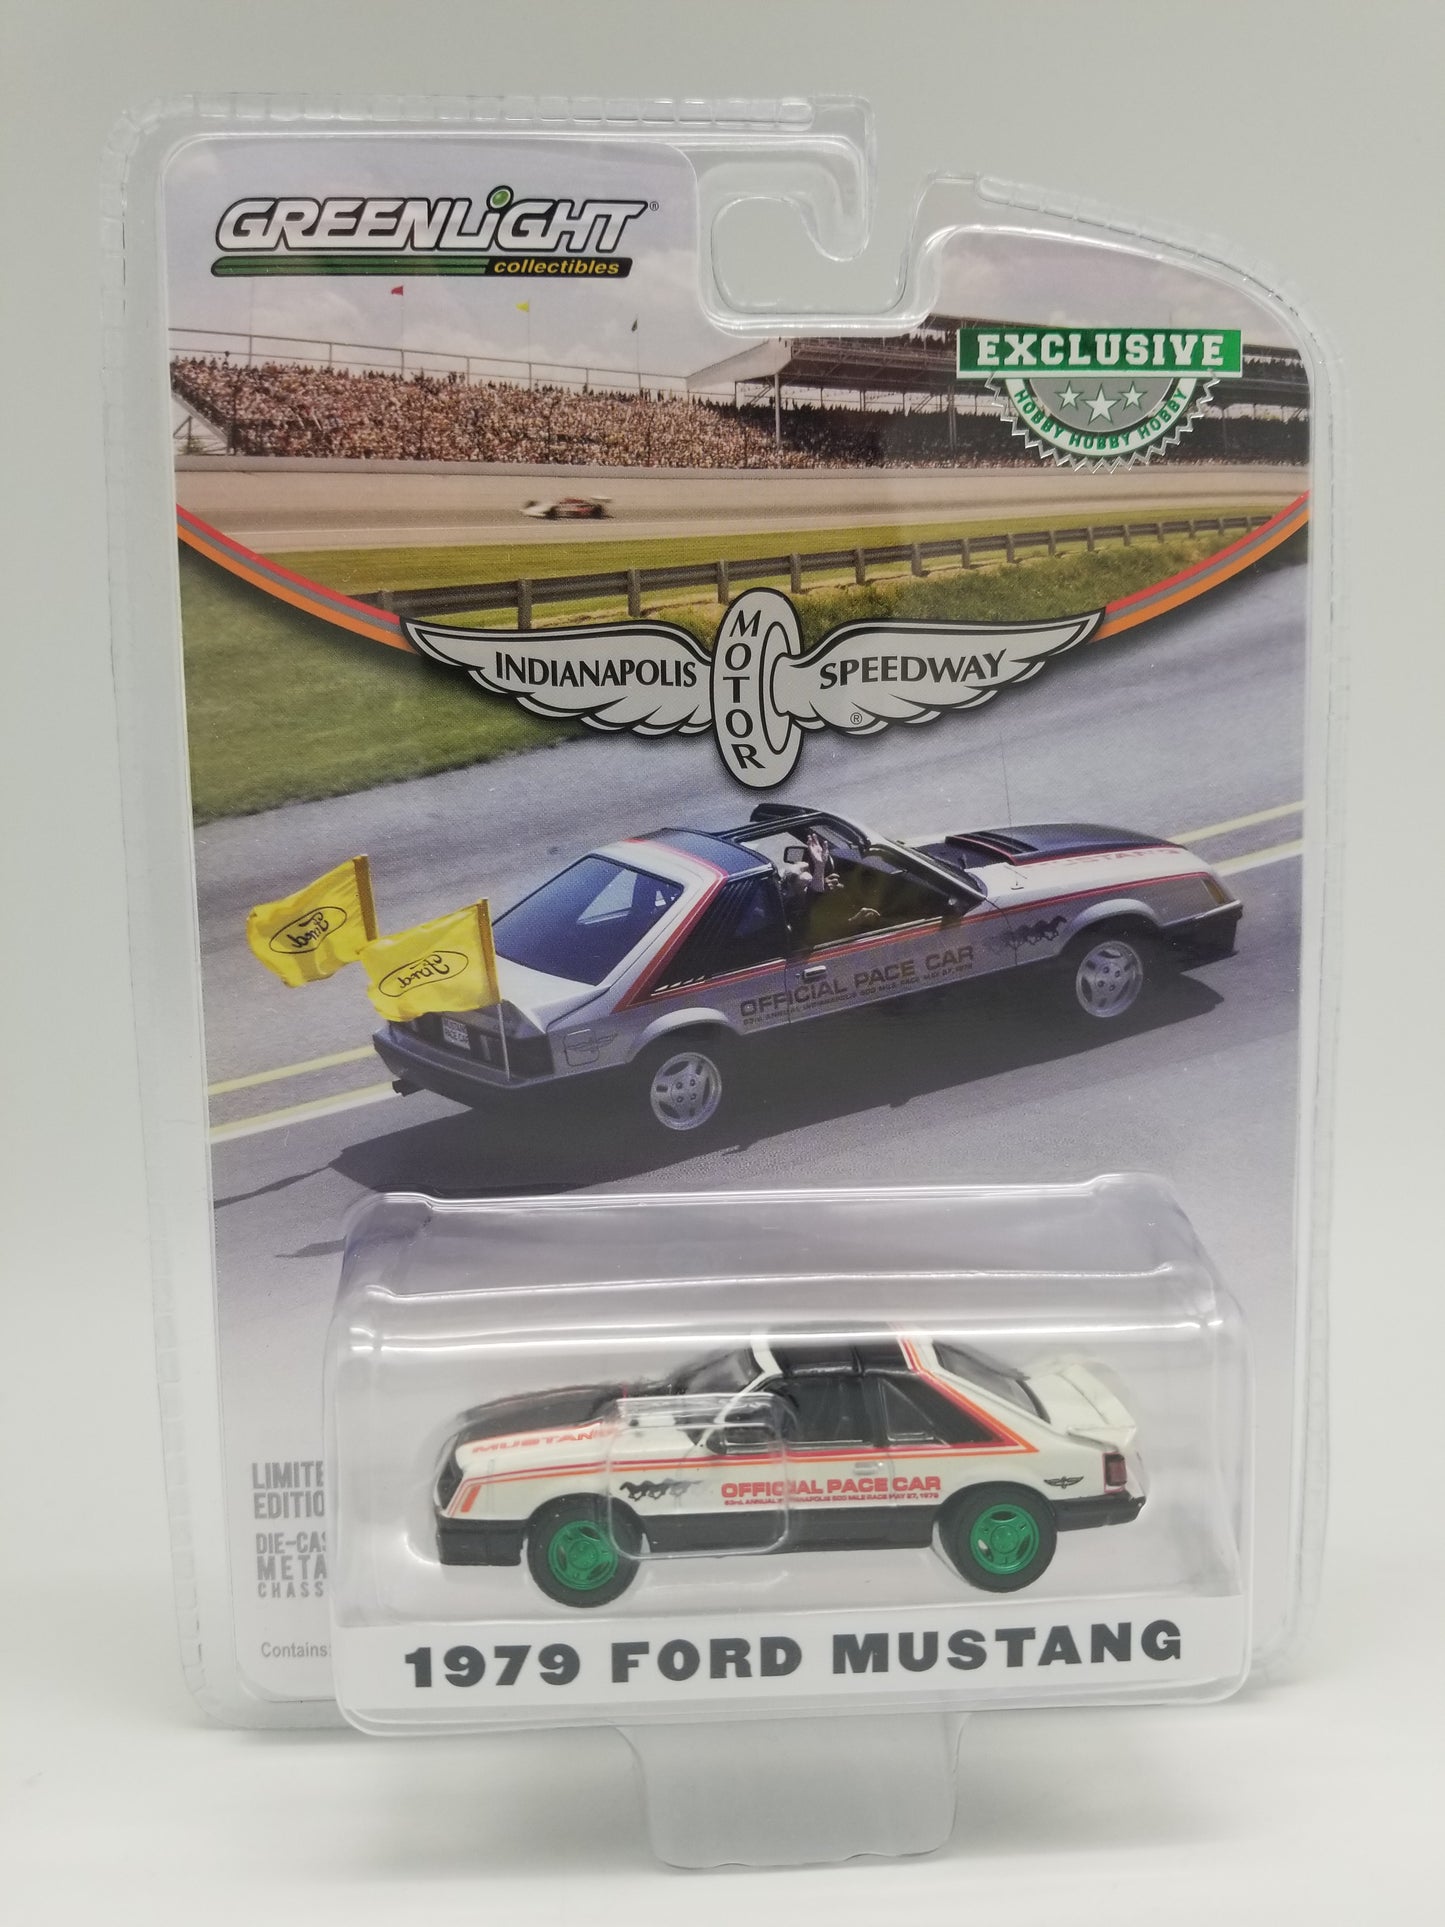 GL CHASE - 1979 Ford Mustang Indianapolis Motor Speedway Pace Car